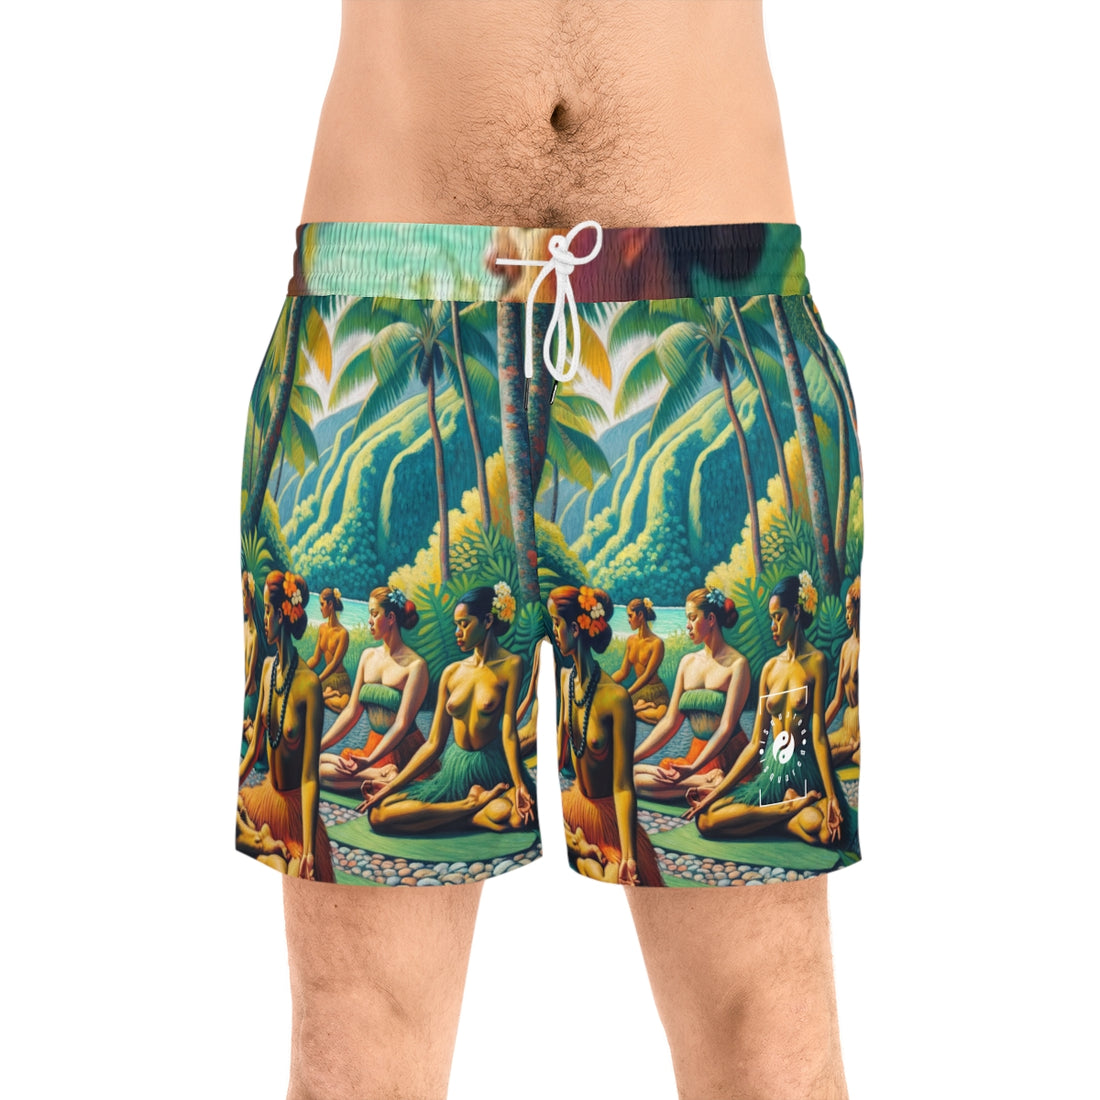 Get Ready for Summer with our new Swim Trunks and Swim Shorts!!